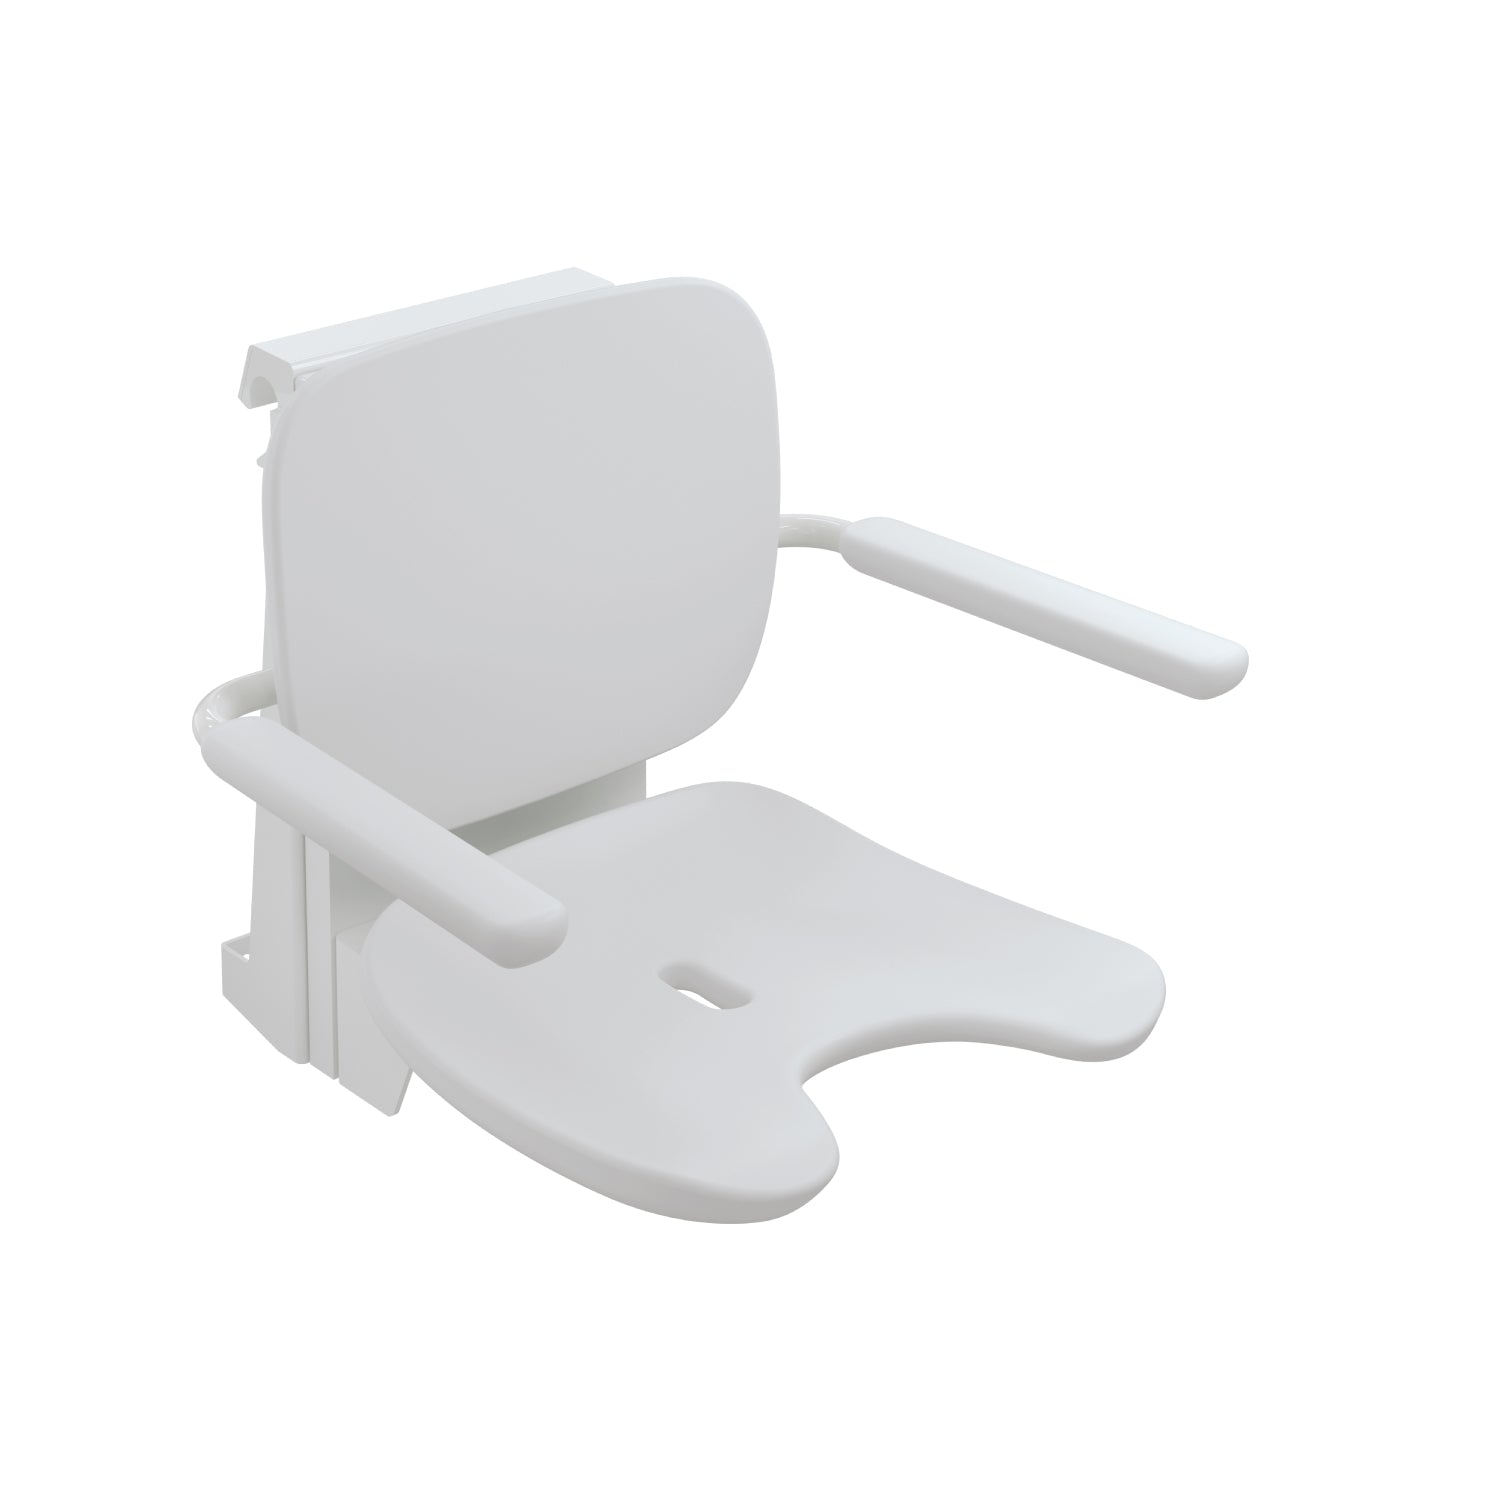 Desergo adjustable hanging seat with a white finish on a white background